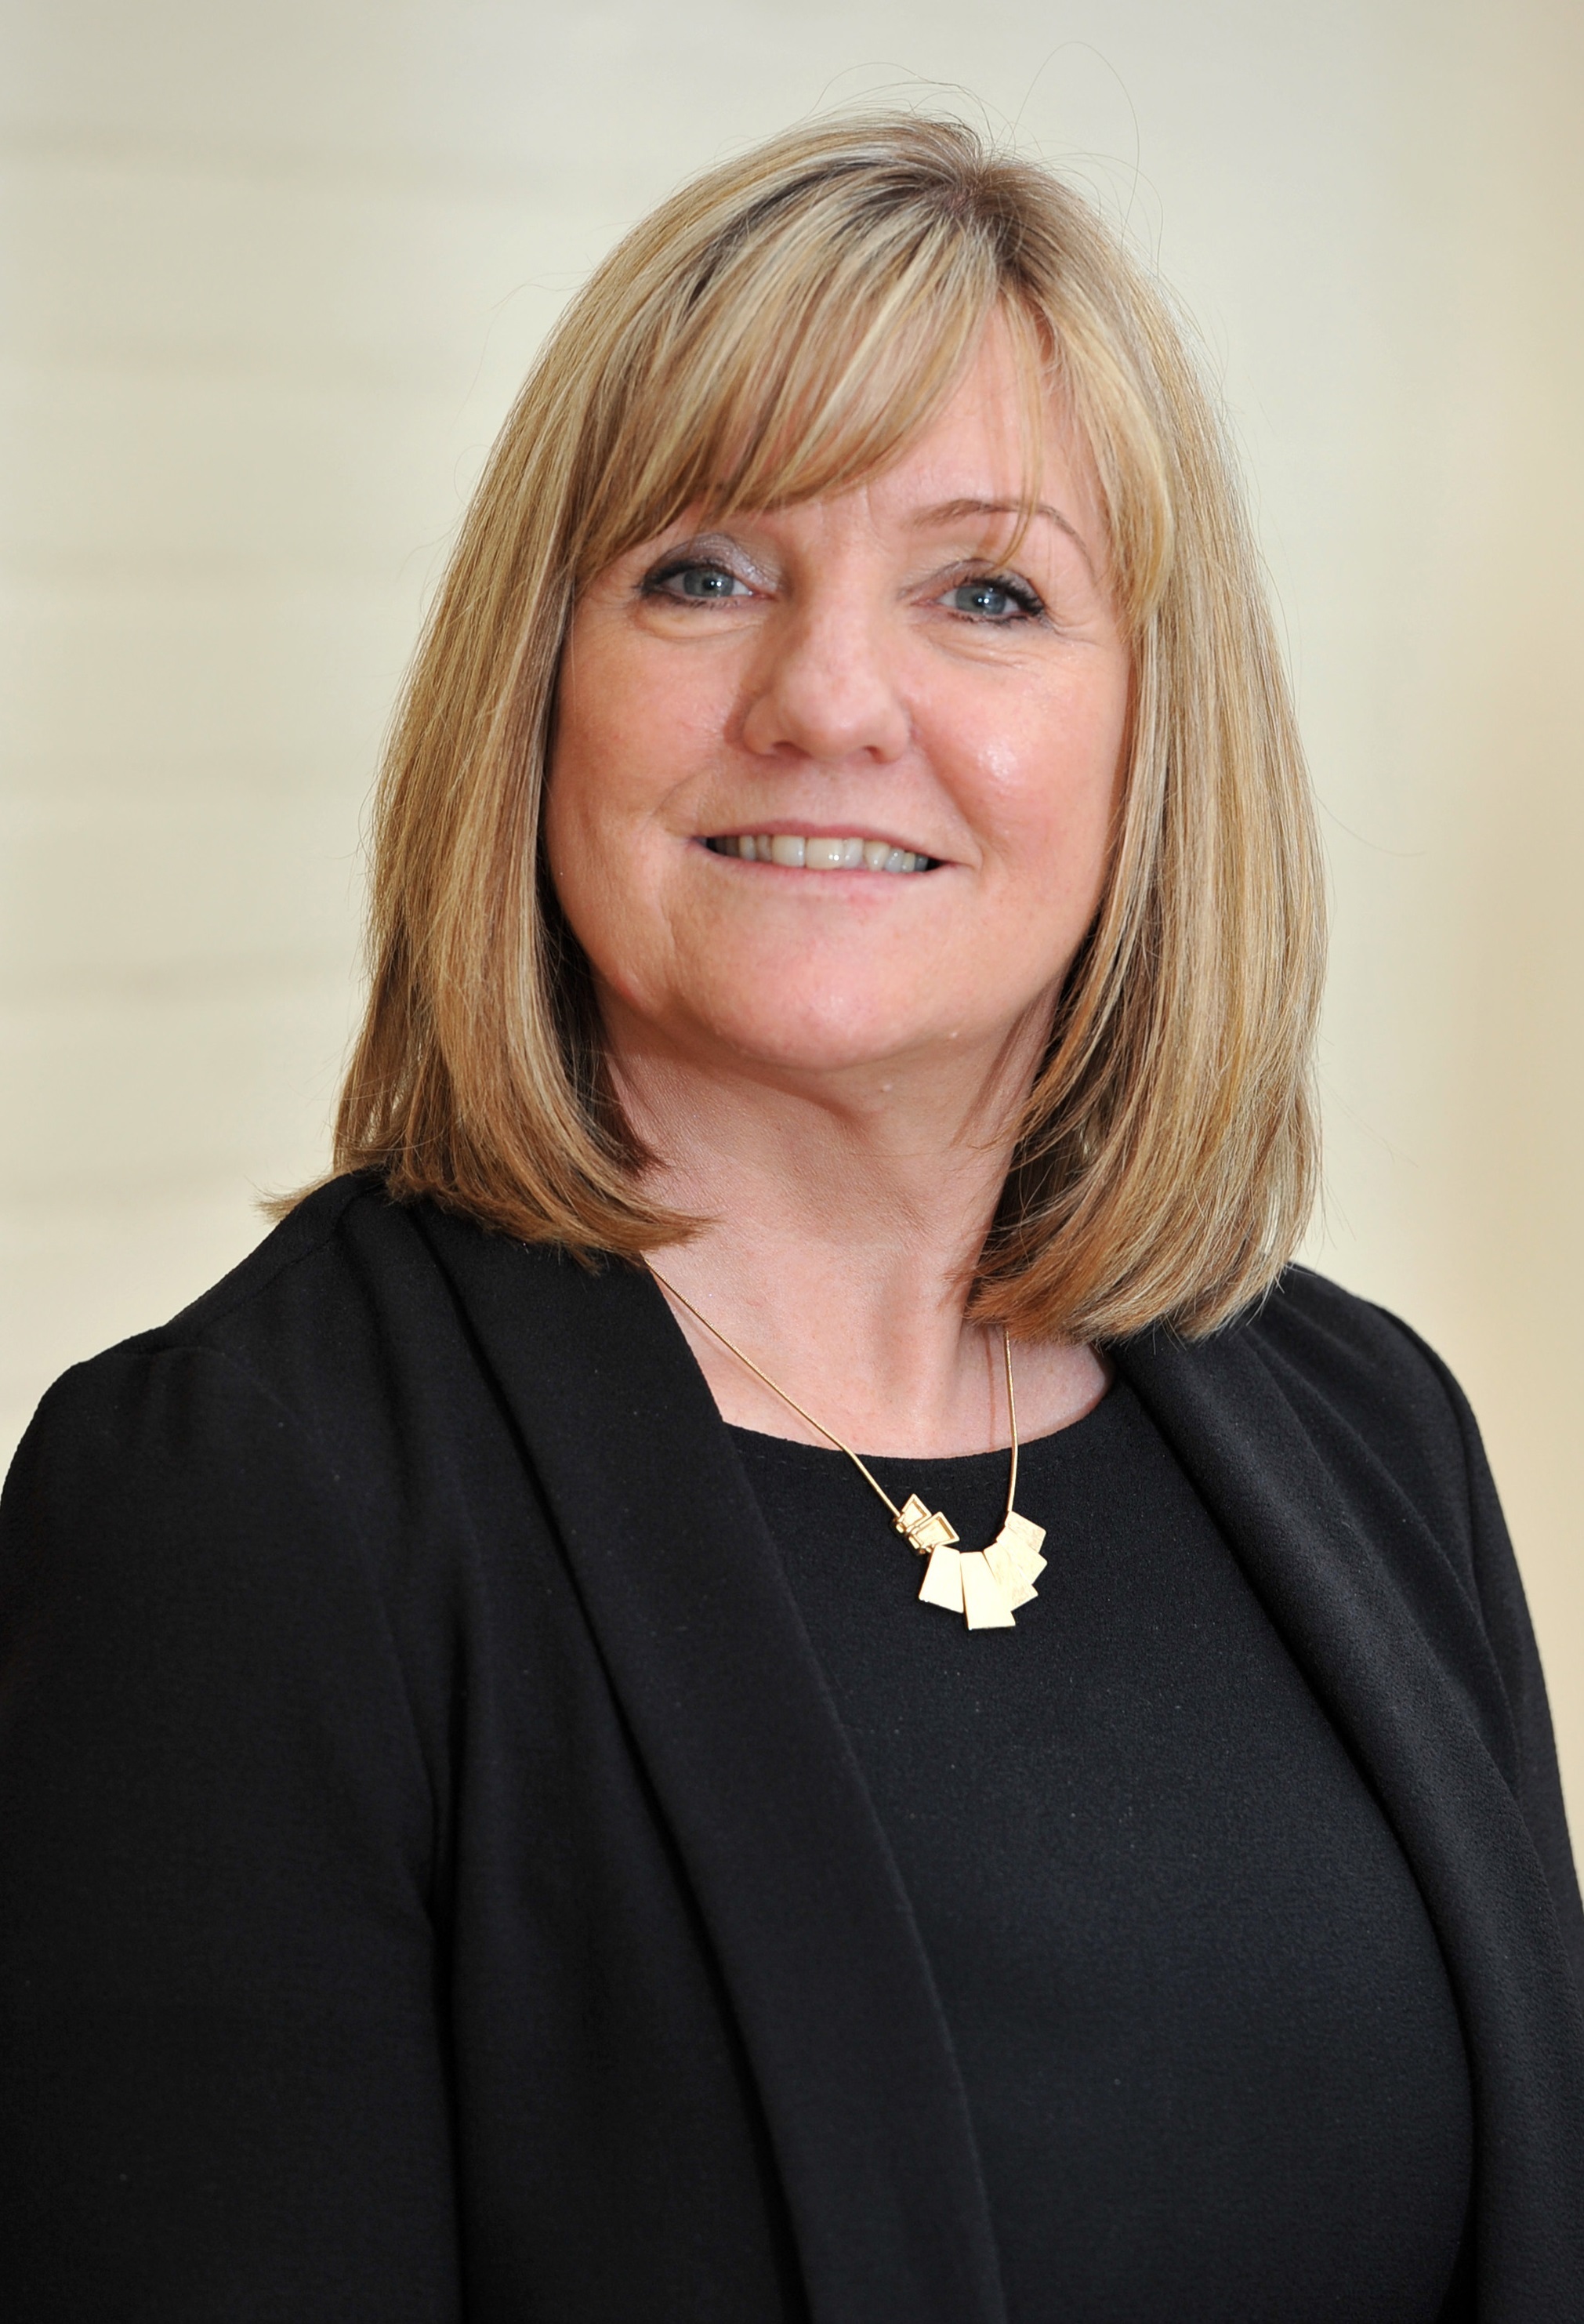 New director of operations appointed by health trust